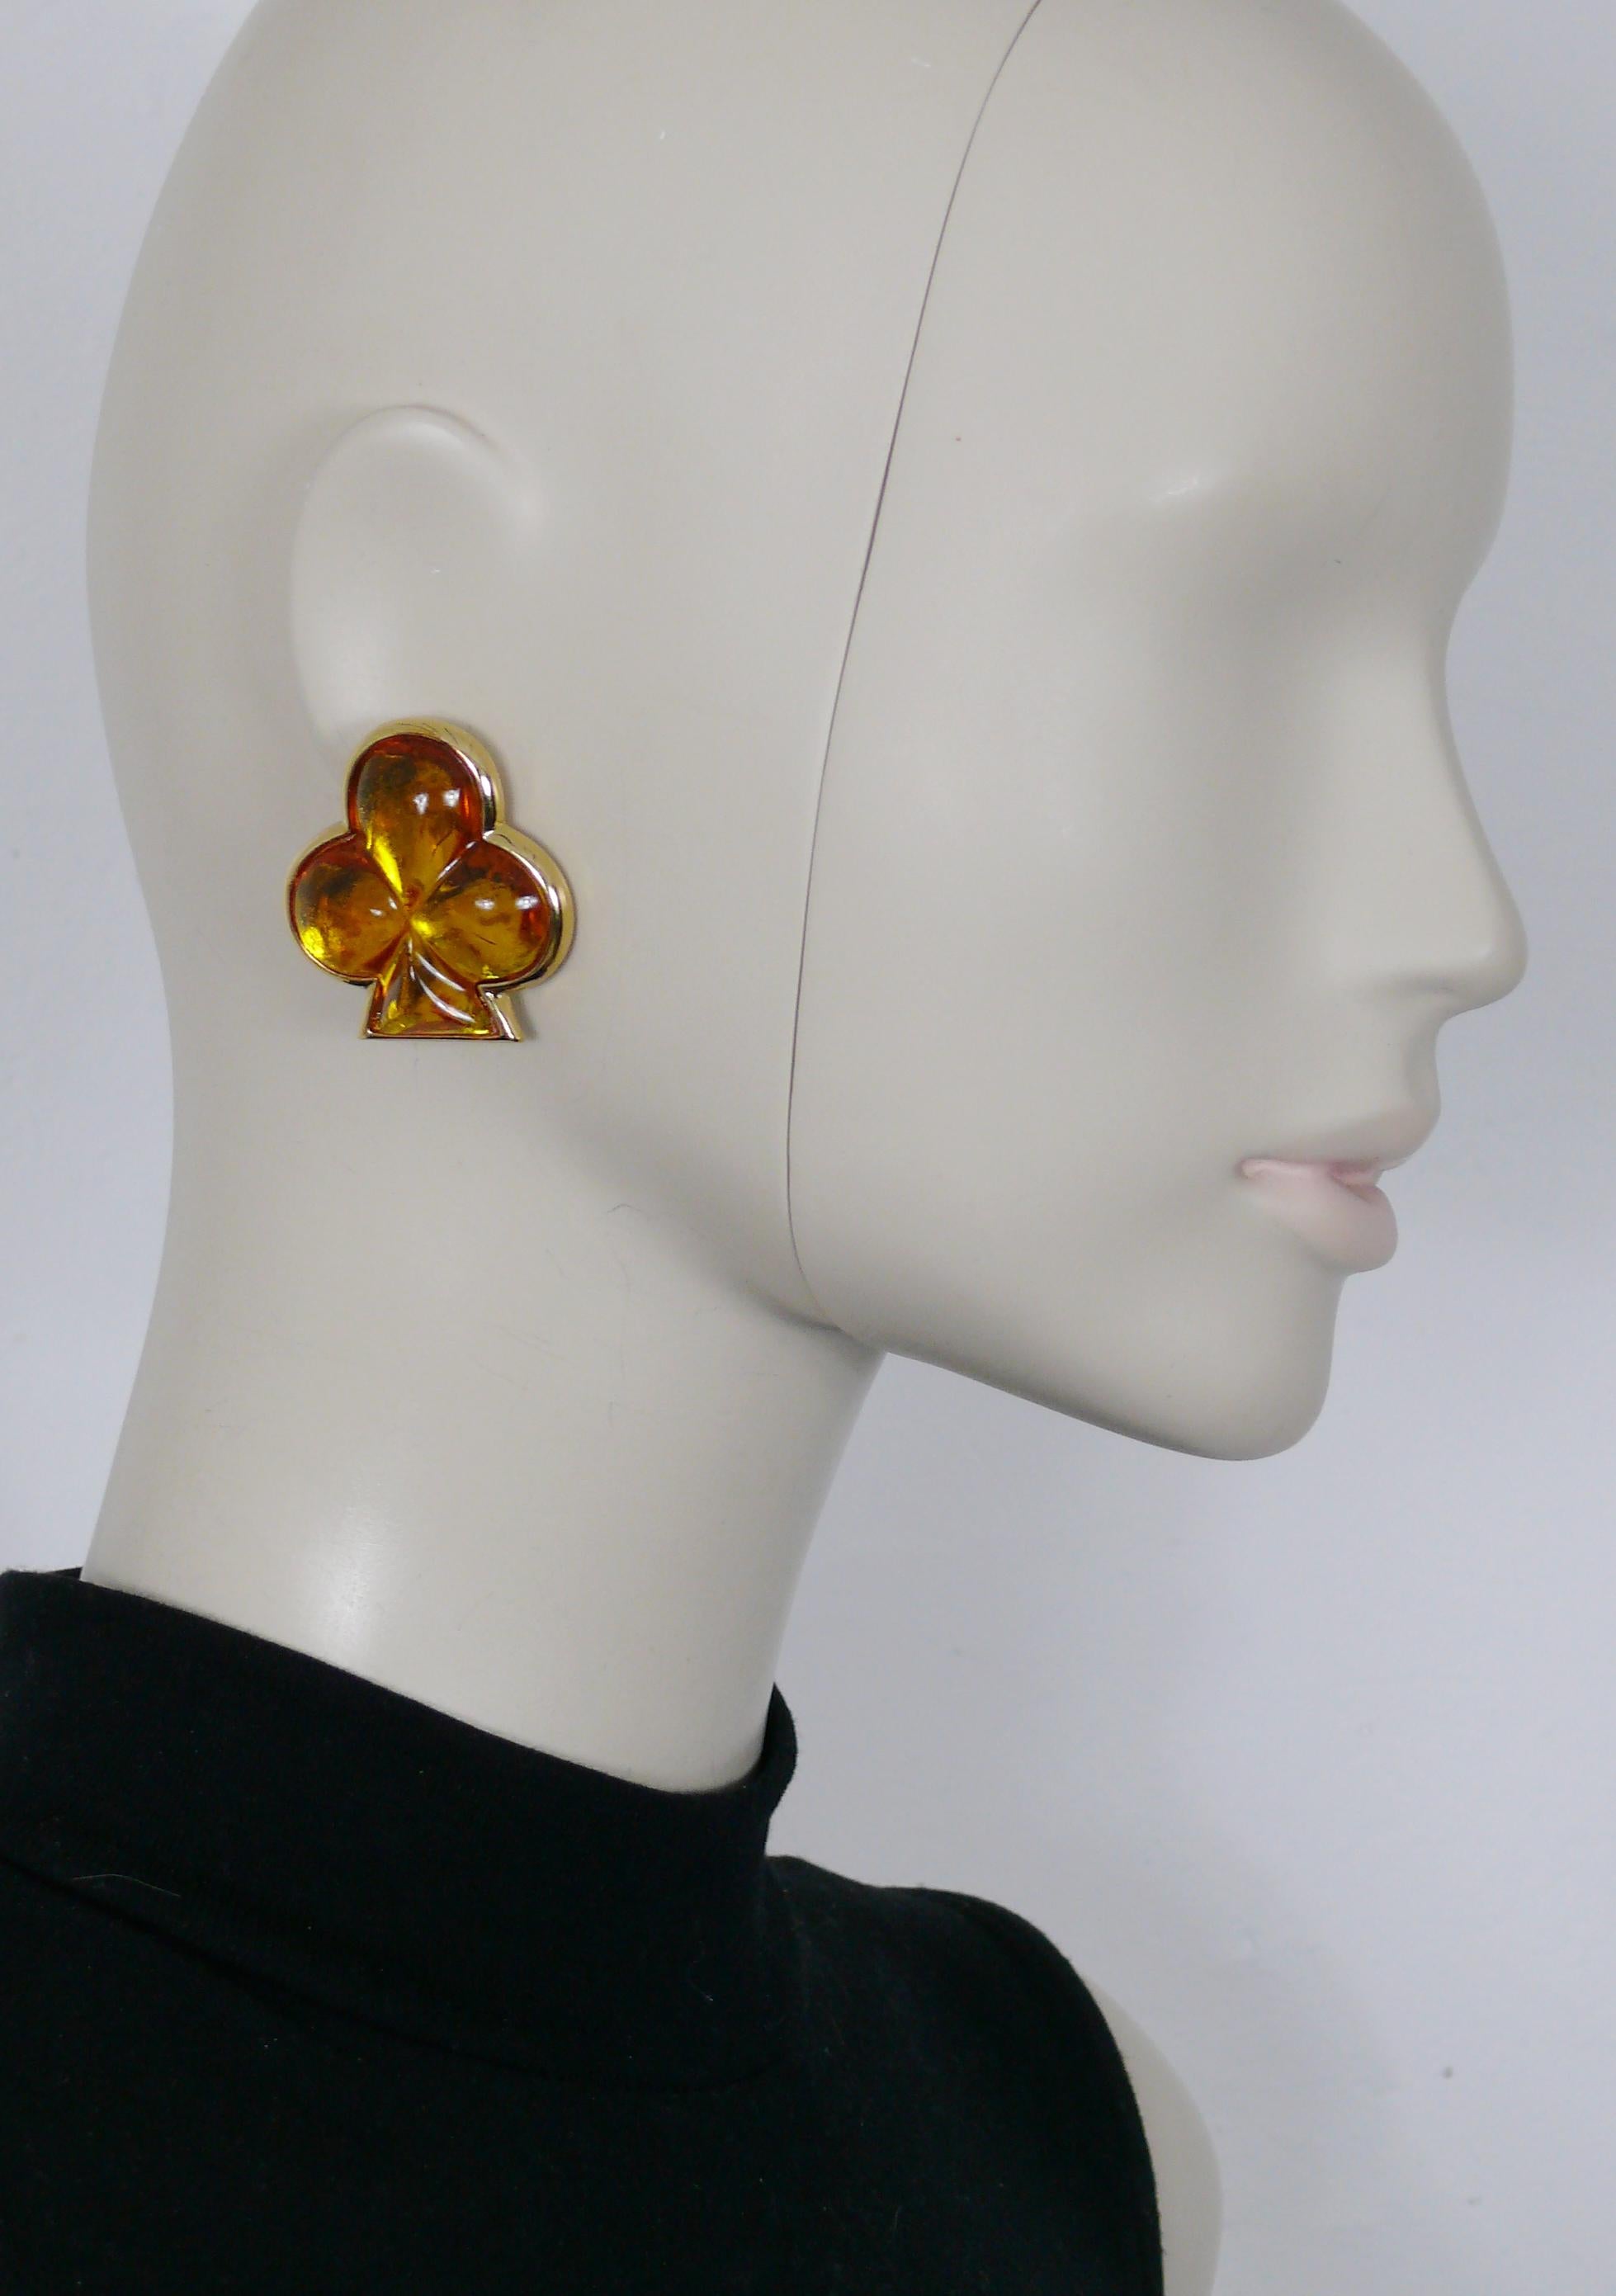 YVES SAINT LAURENT vintage gold toned and orange resin clubs clip-on earrings.

Embossed YSL Made in France.

Indicative measurements : max. width approx. 3.7 cm (1.46 inches) / height approx. 4 cm (1.57 inches).

NOTES
- This is a preloved vintage